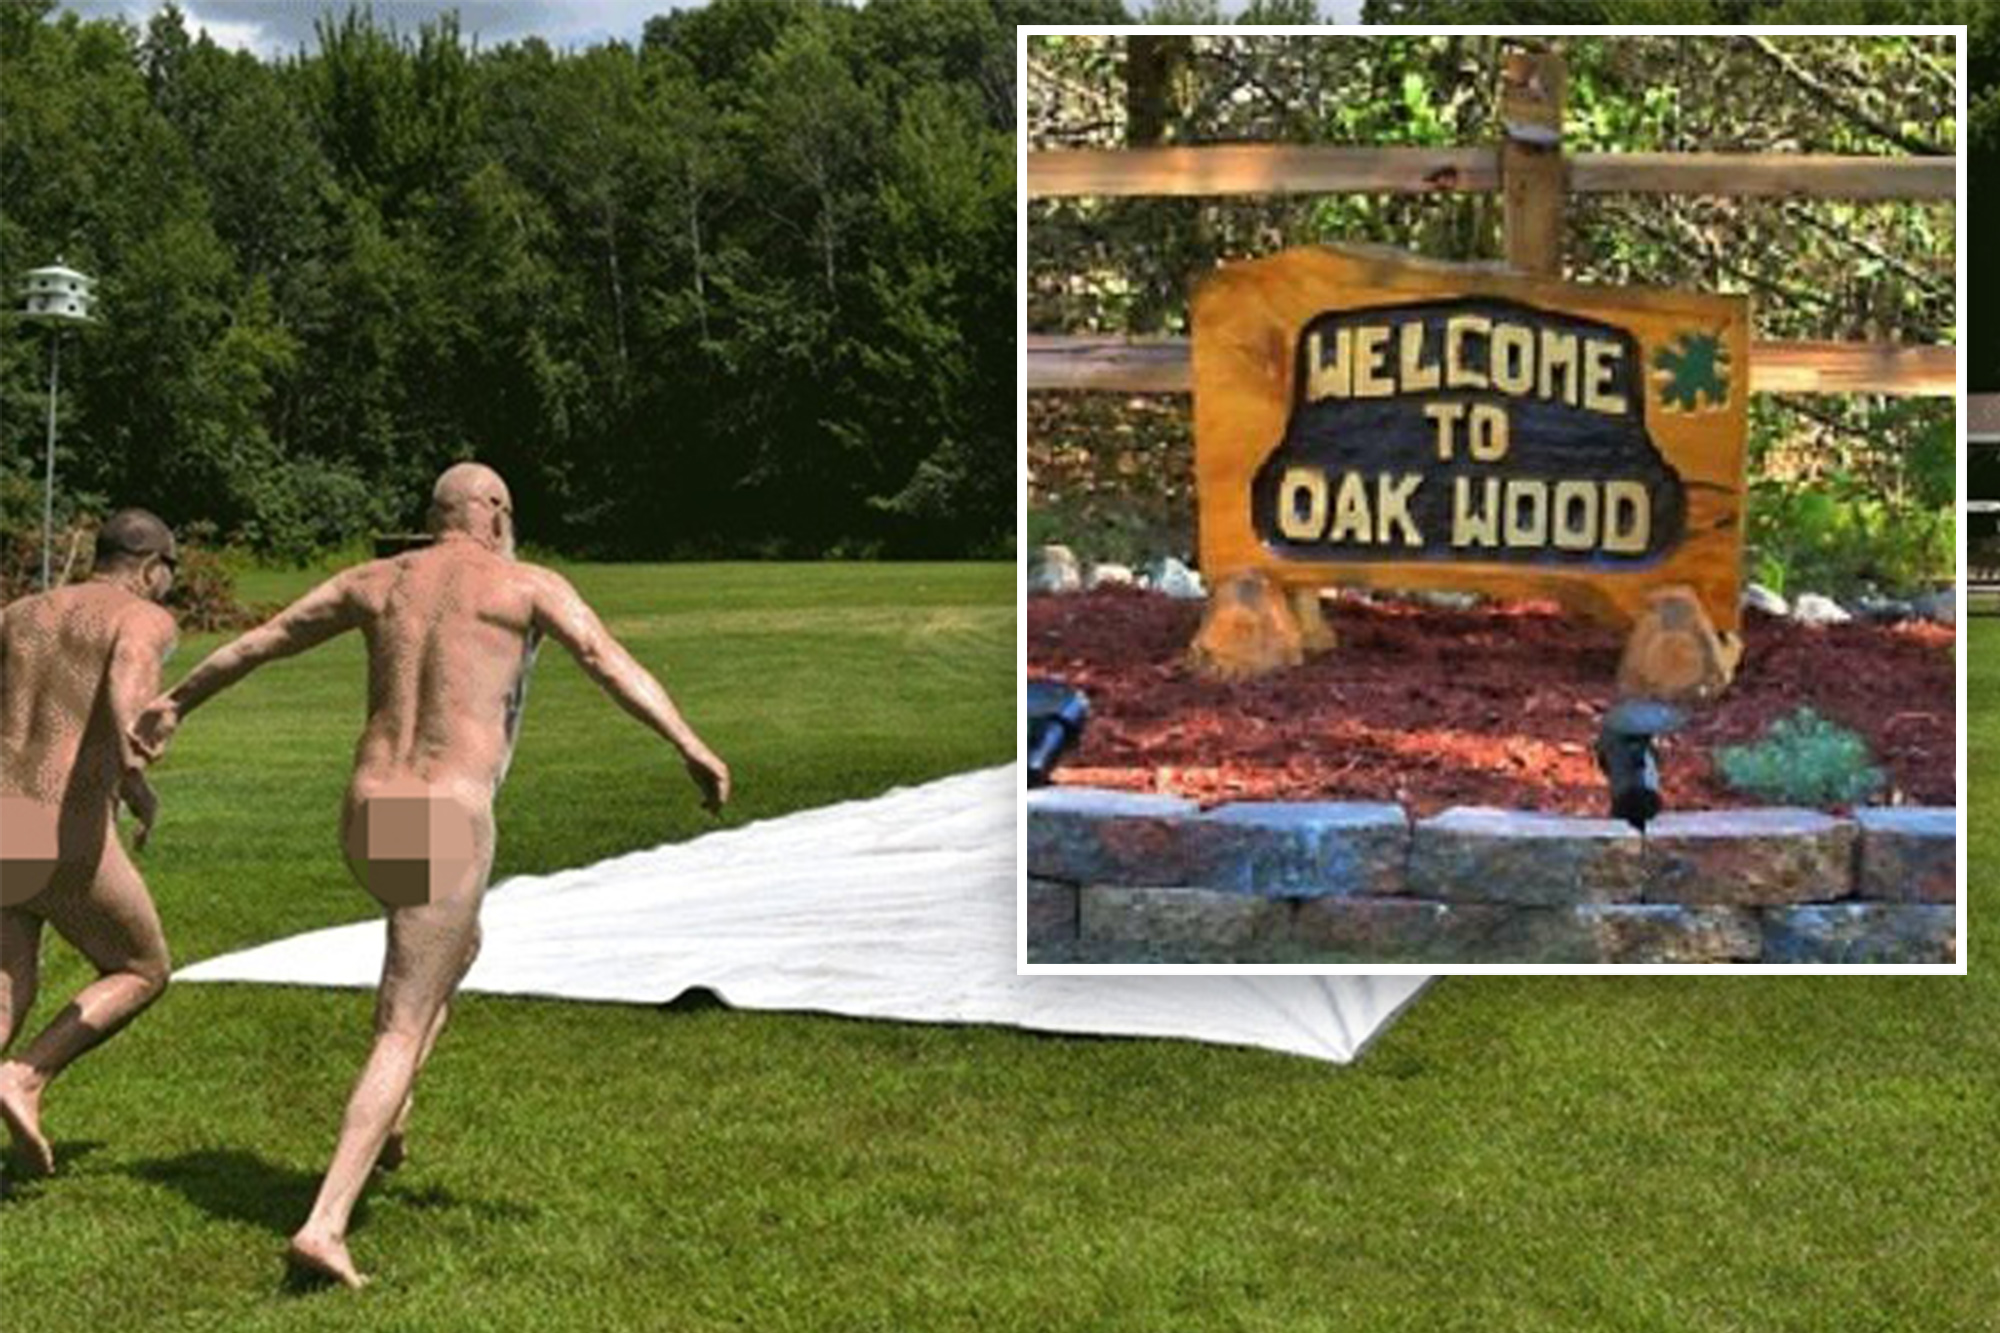 bill diuguid recommends nudist colony in utah pic